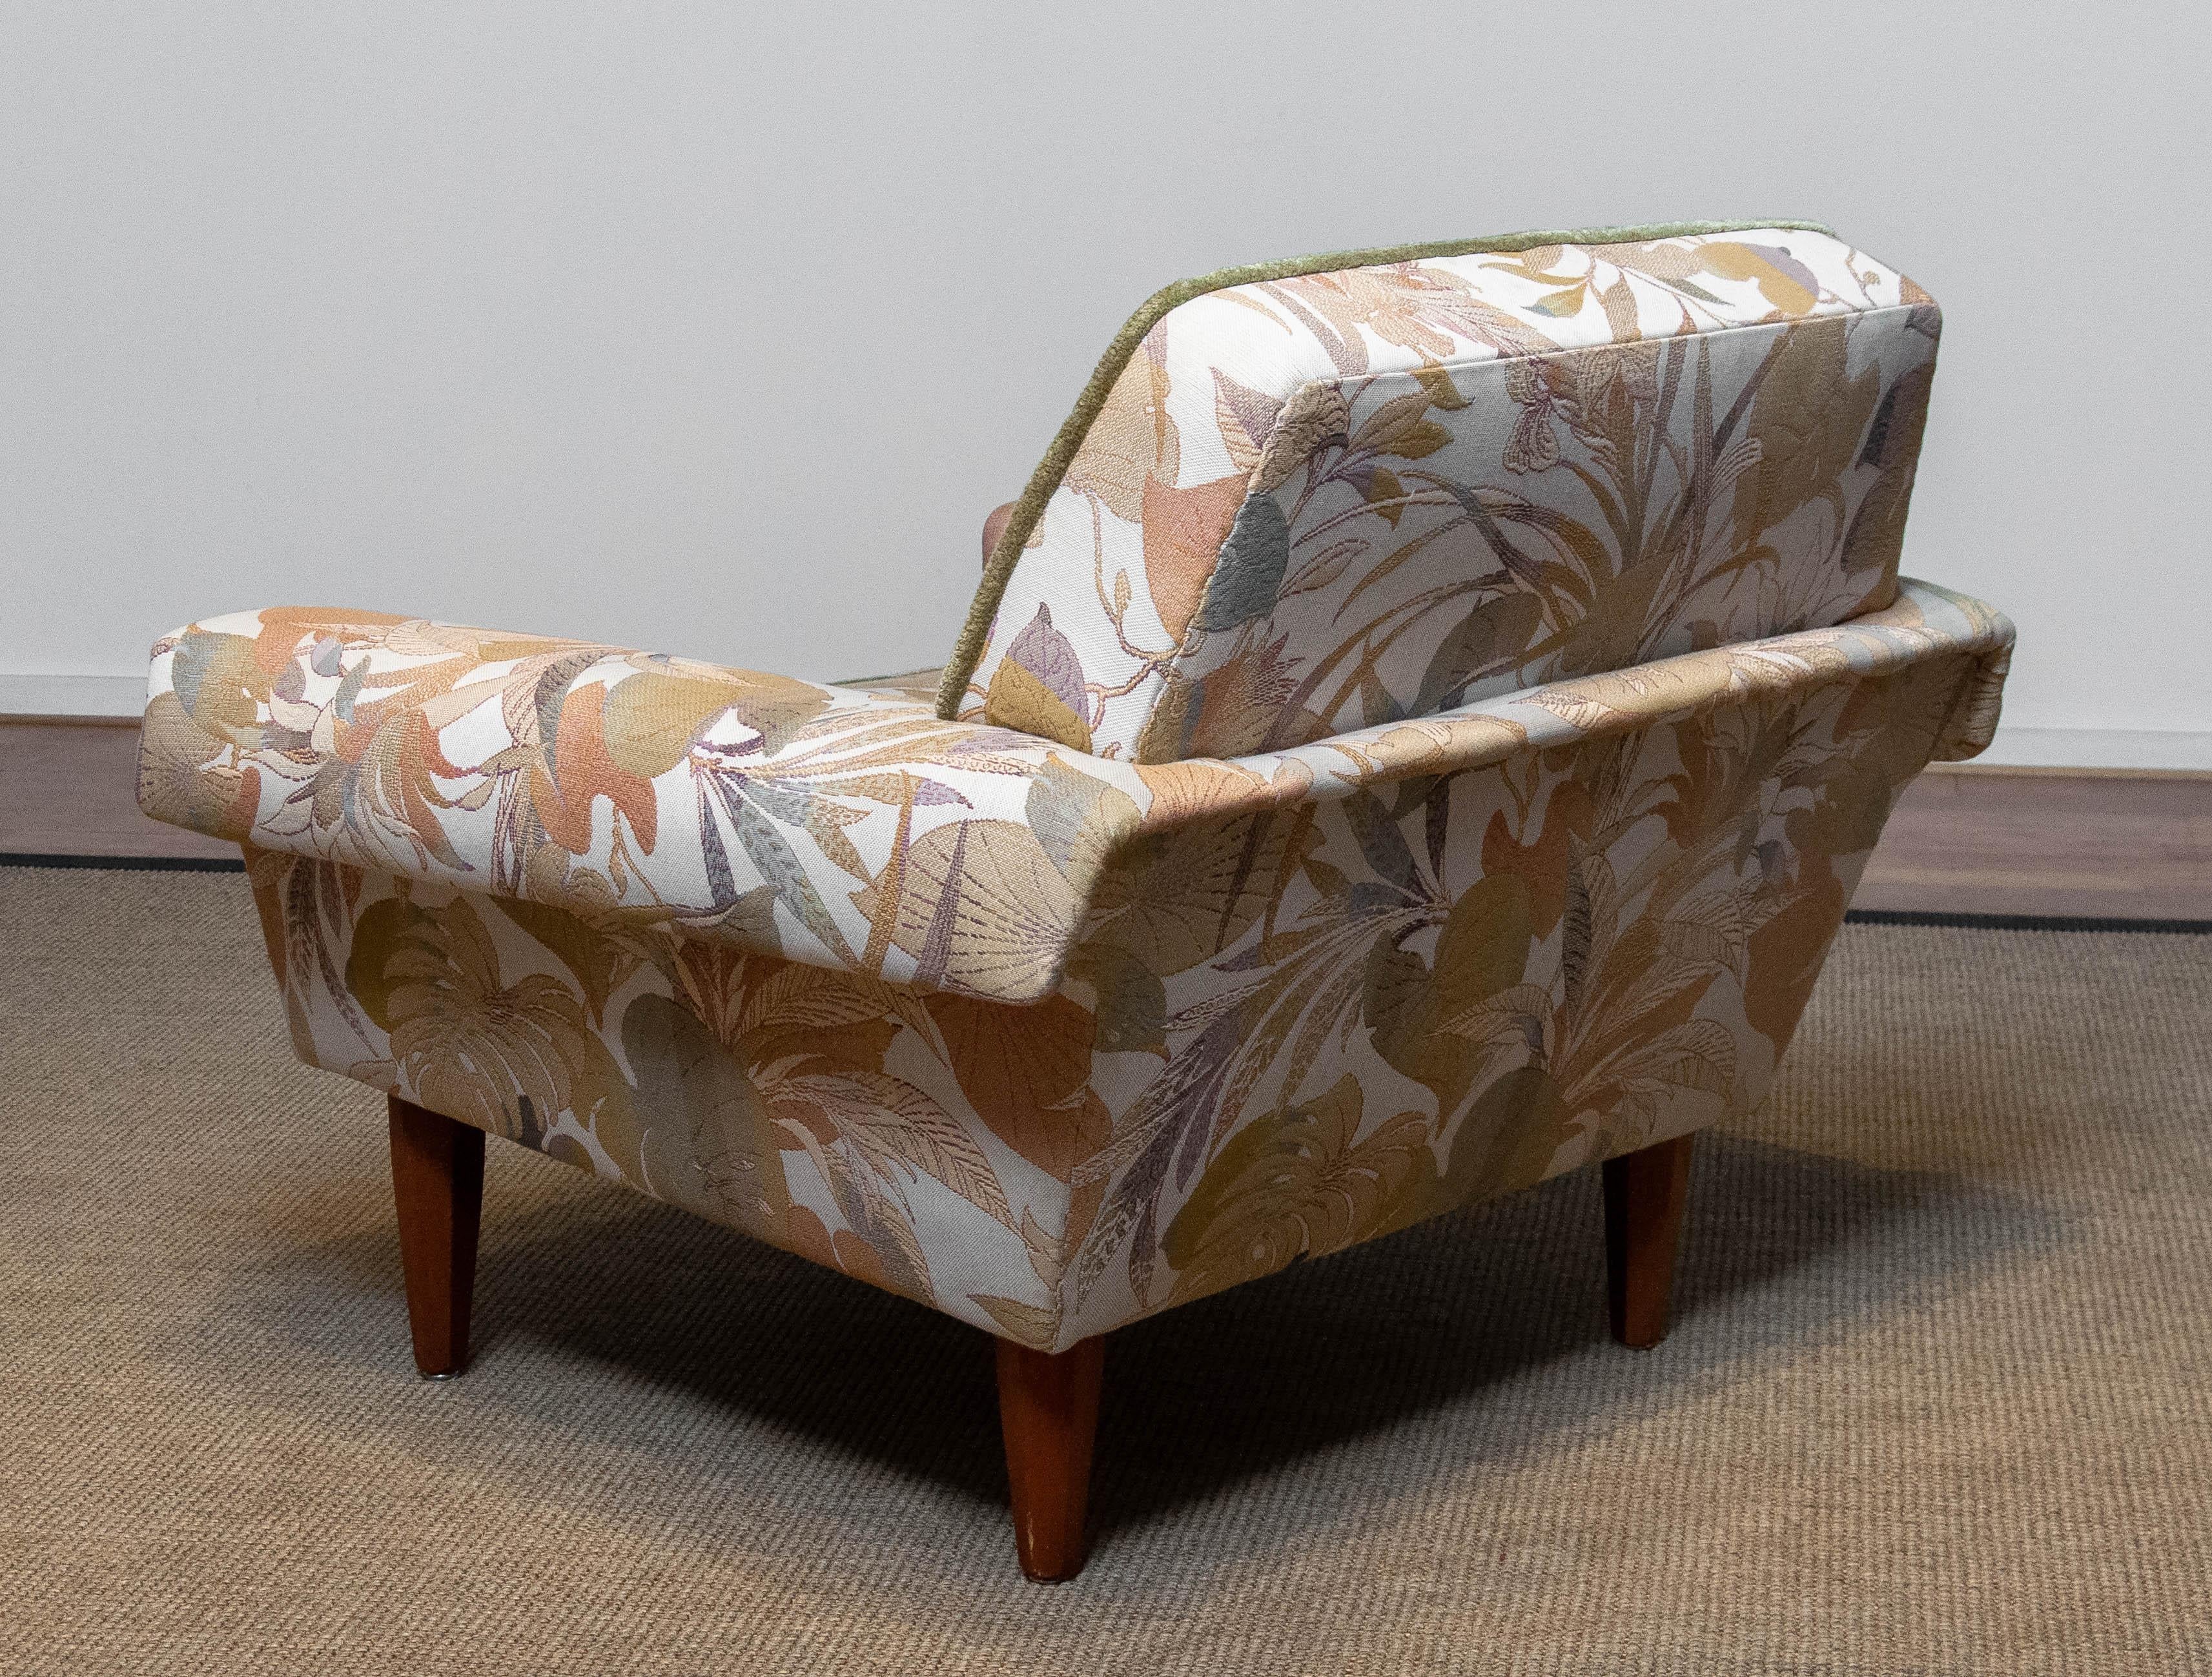 Hollywood Regency Danish Low Back Lounge Chair Upholstered Floral Jacquard Fabric from the 1970's For Sale